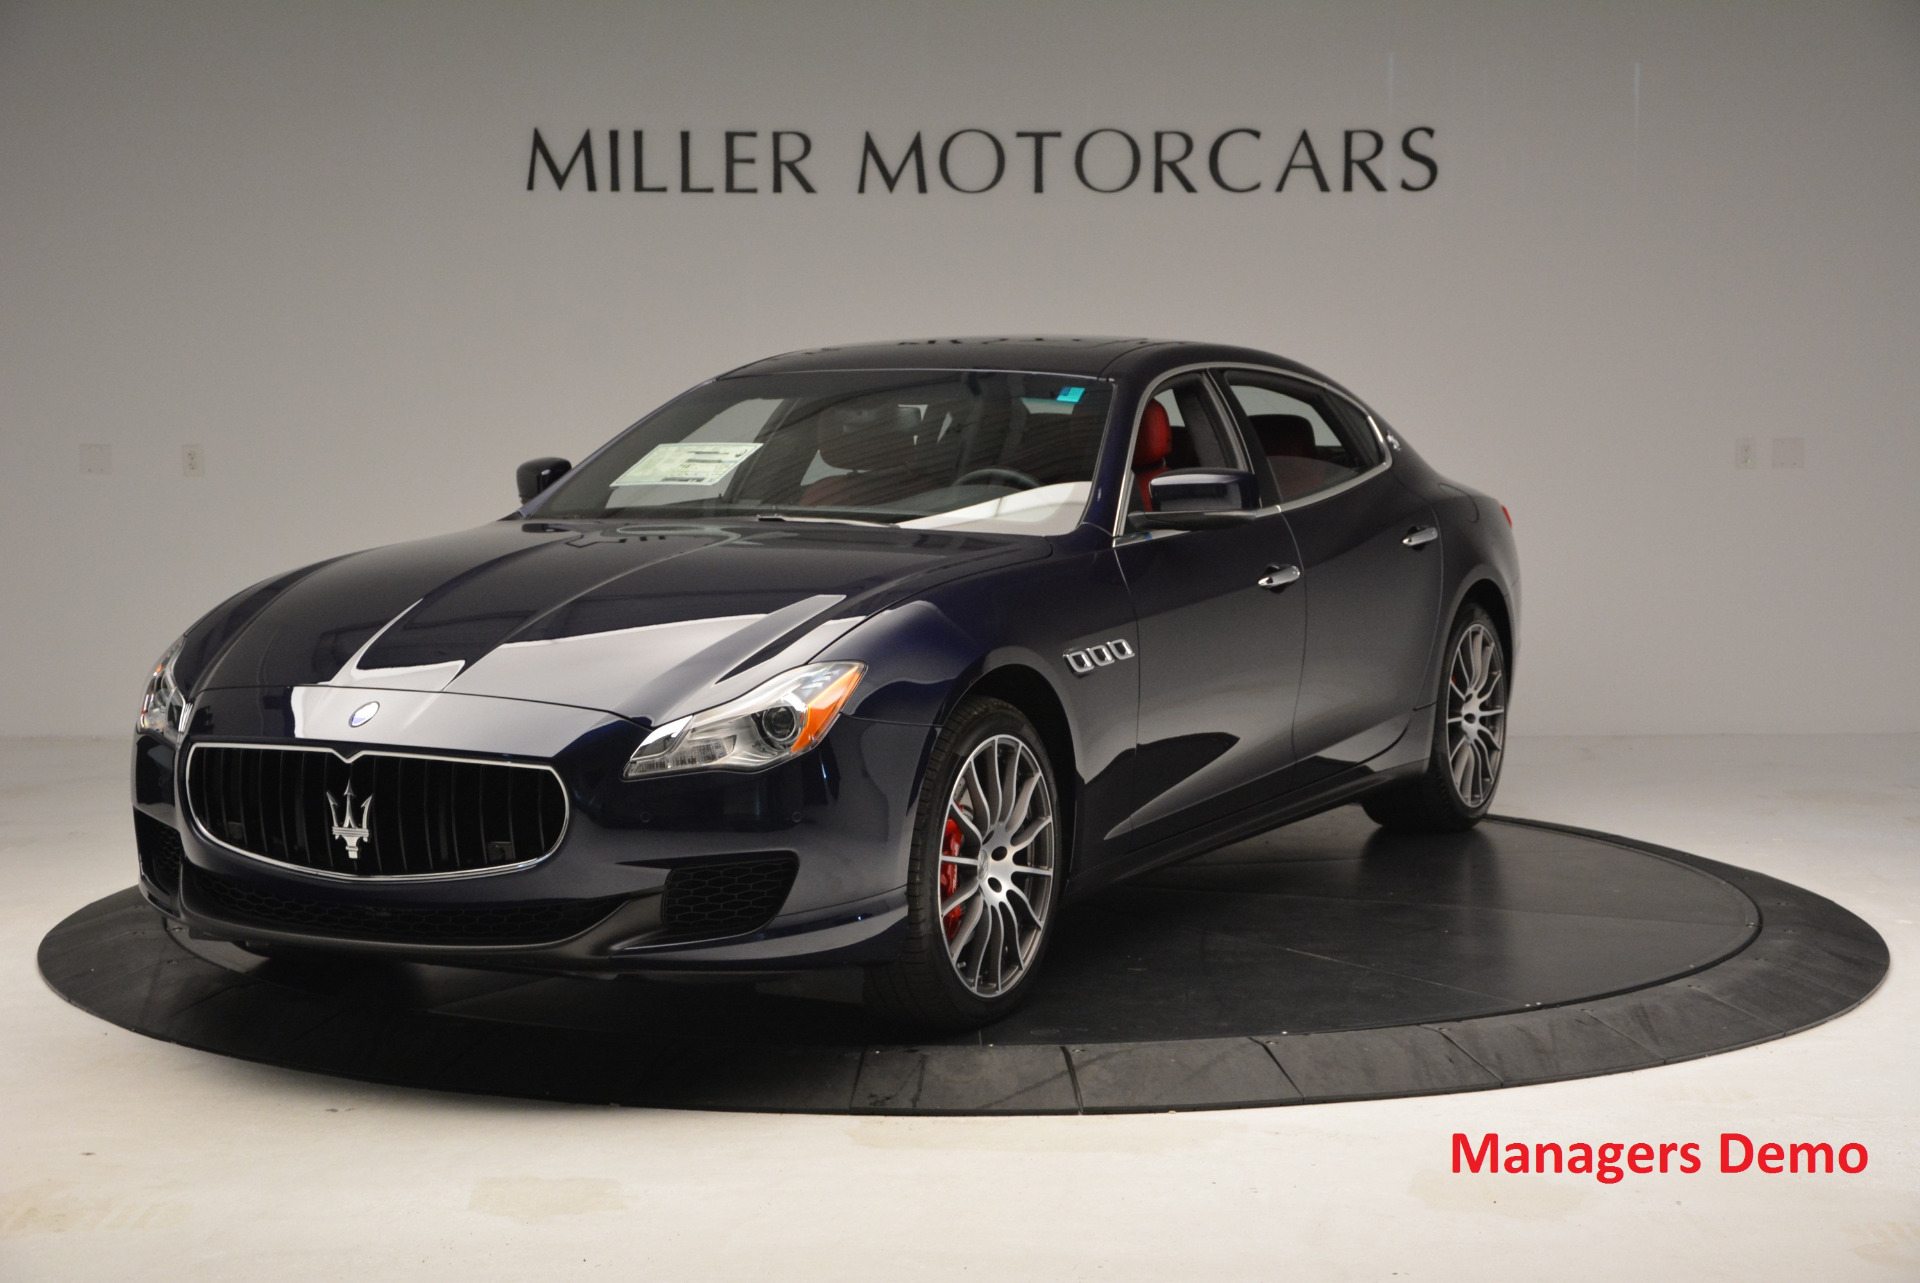 New 2016 Maserati Quattroporte S Q4  *******      DEALERS  DEMO for sale Sold at Bentley Greenwich in Greenwich CT 06830 1